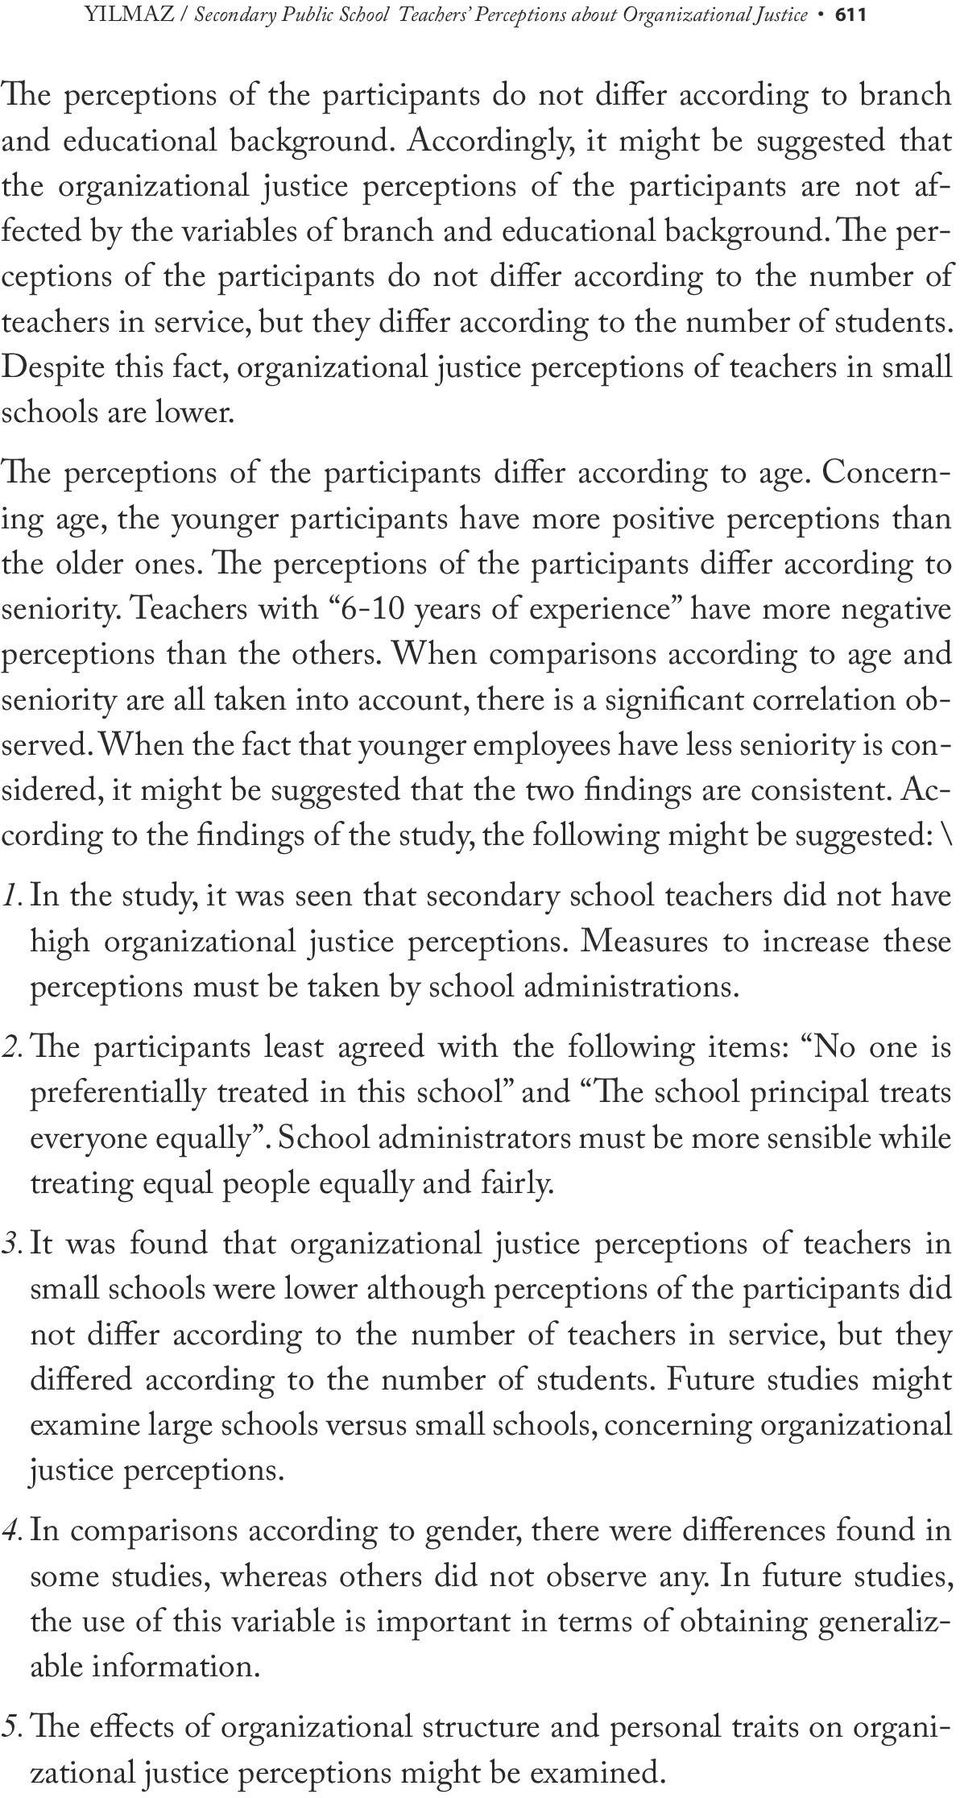 The perceptions of the participants do not differ according to the number of teachers in service, but they differ according to the number of students.